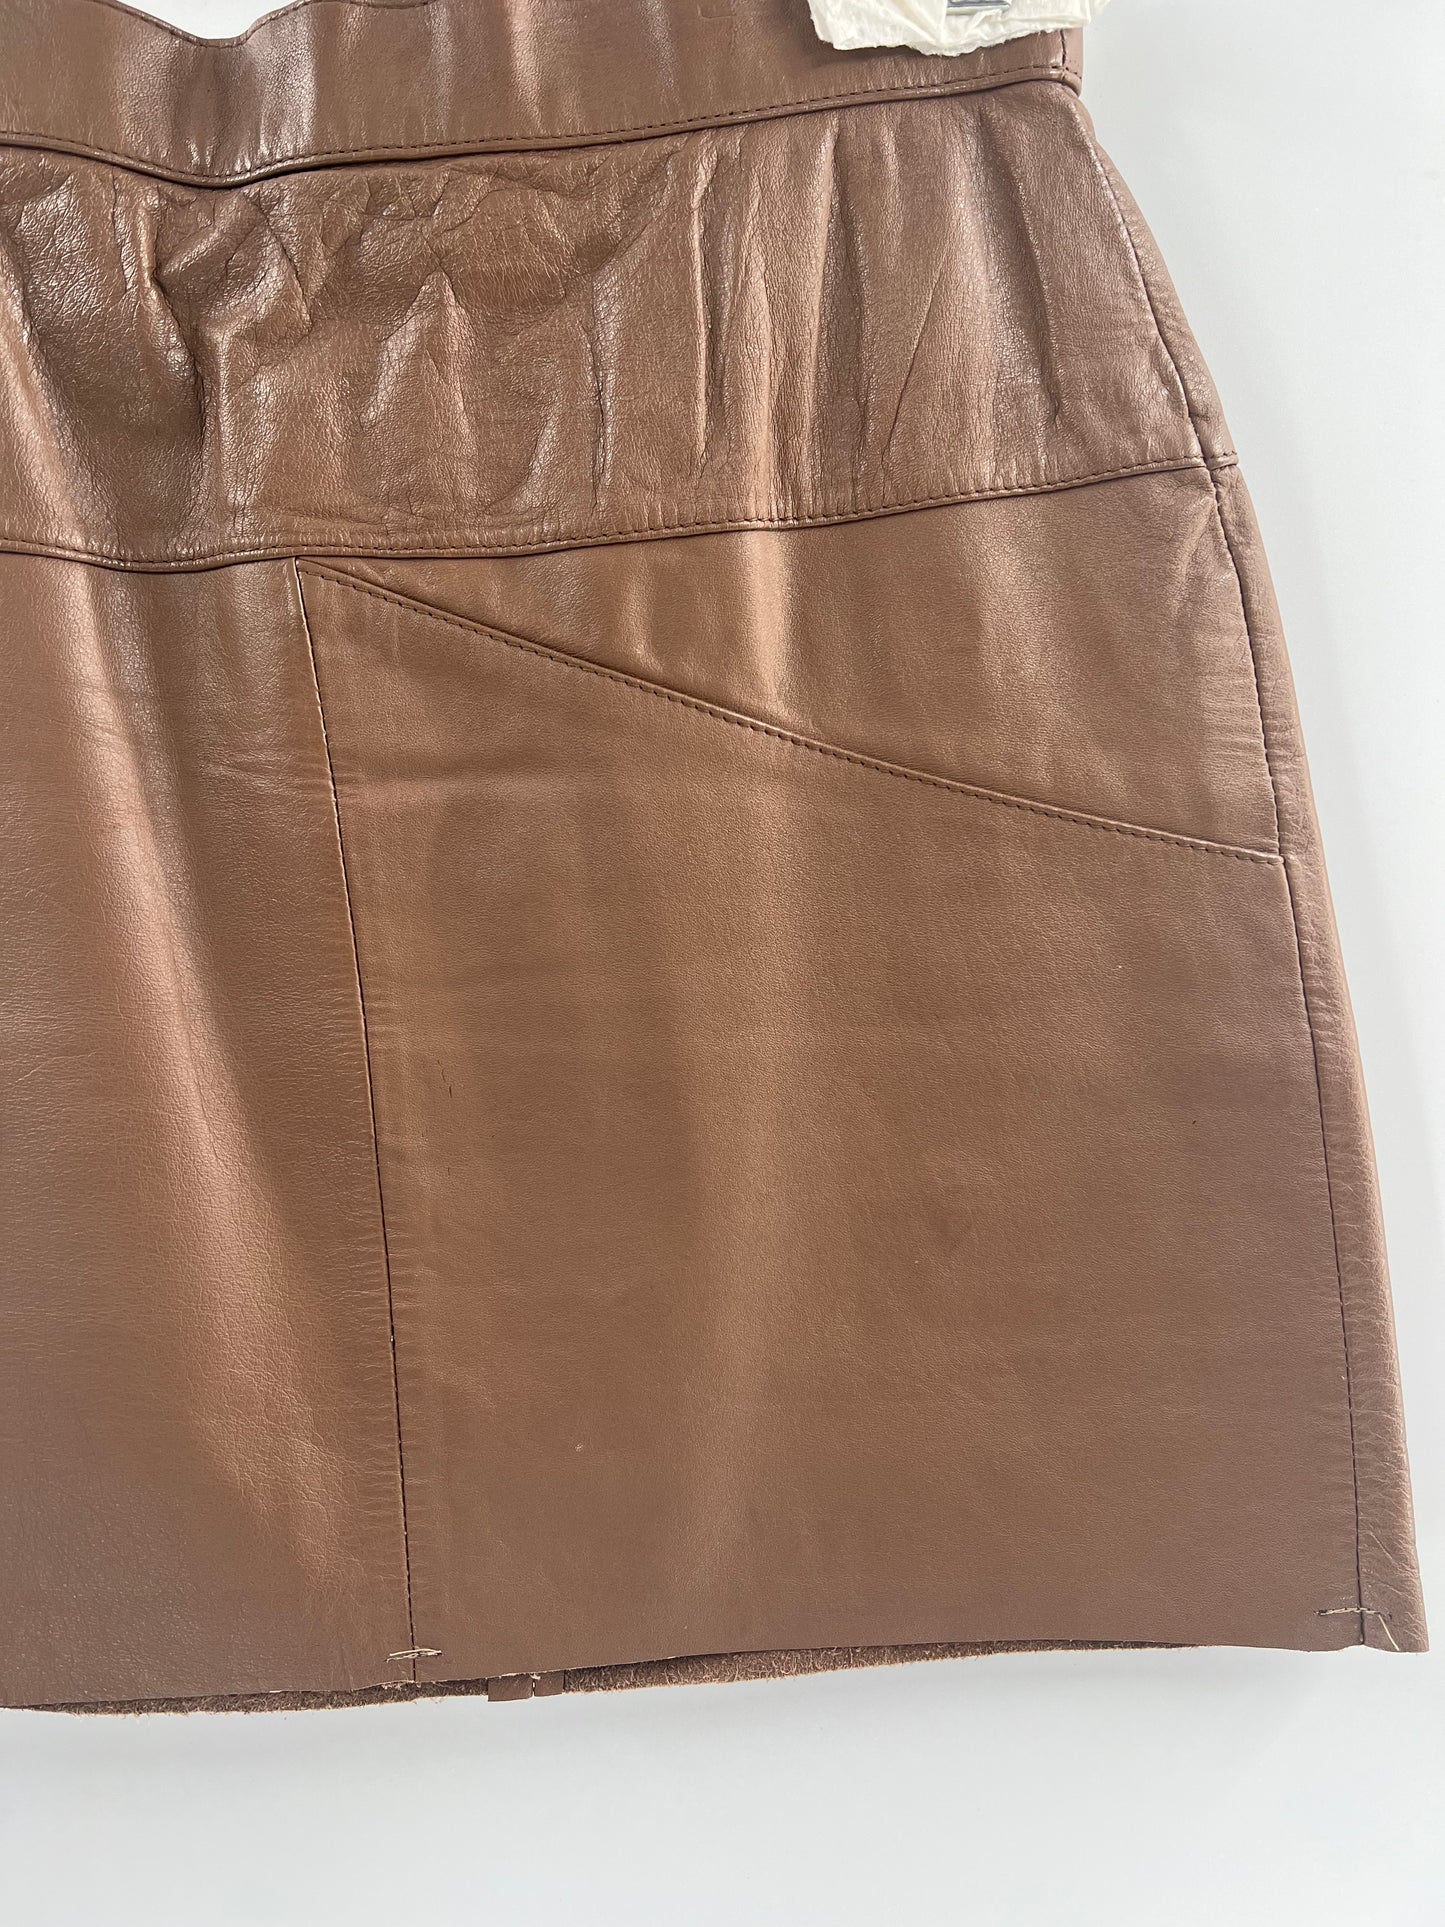 Urban Outfitters Brown Leather Mini Skirt (Sz 5/6)